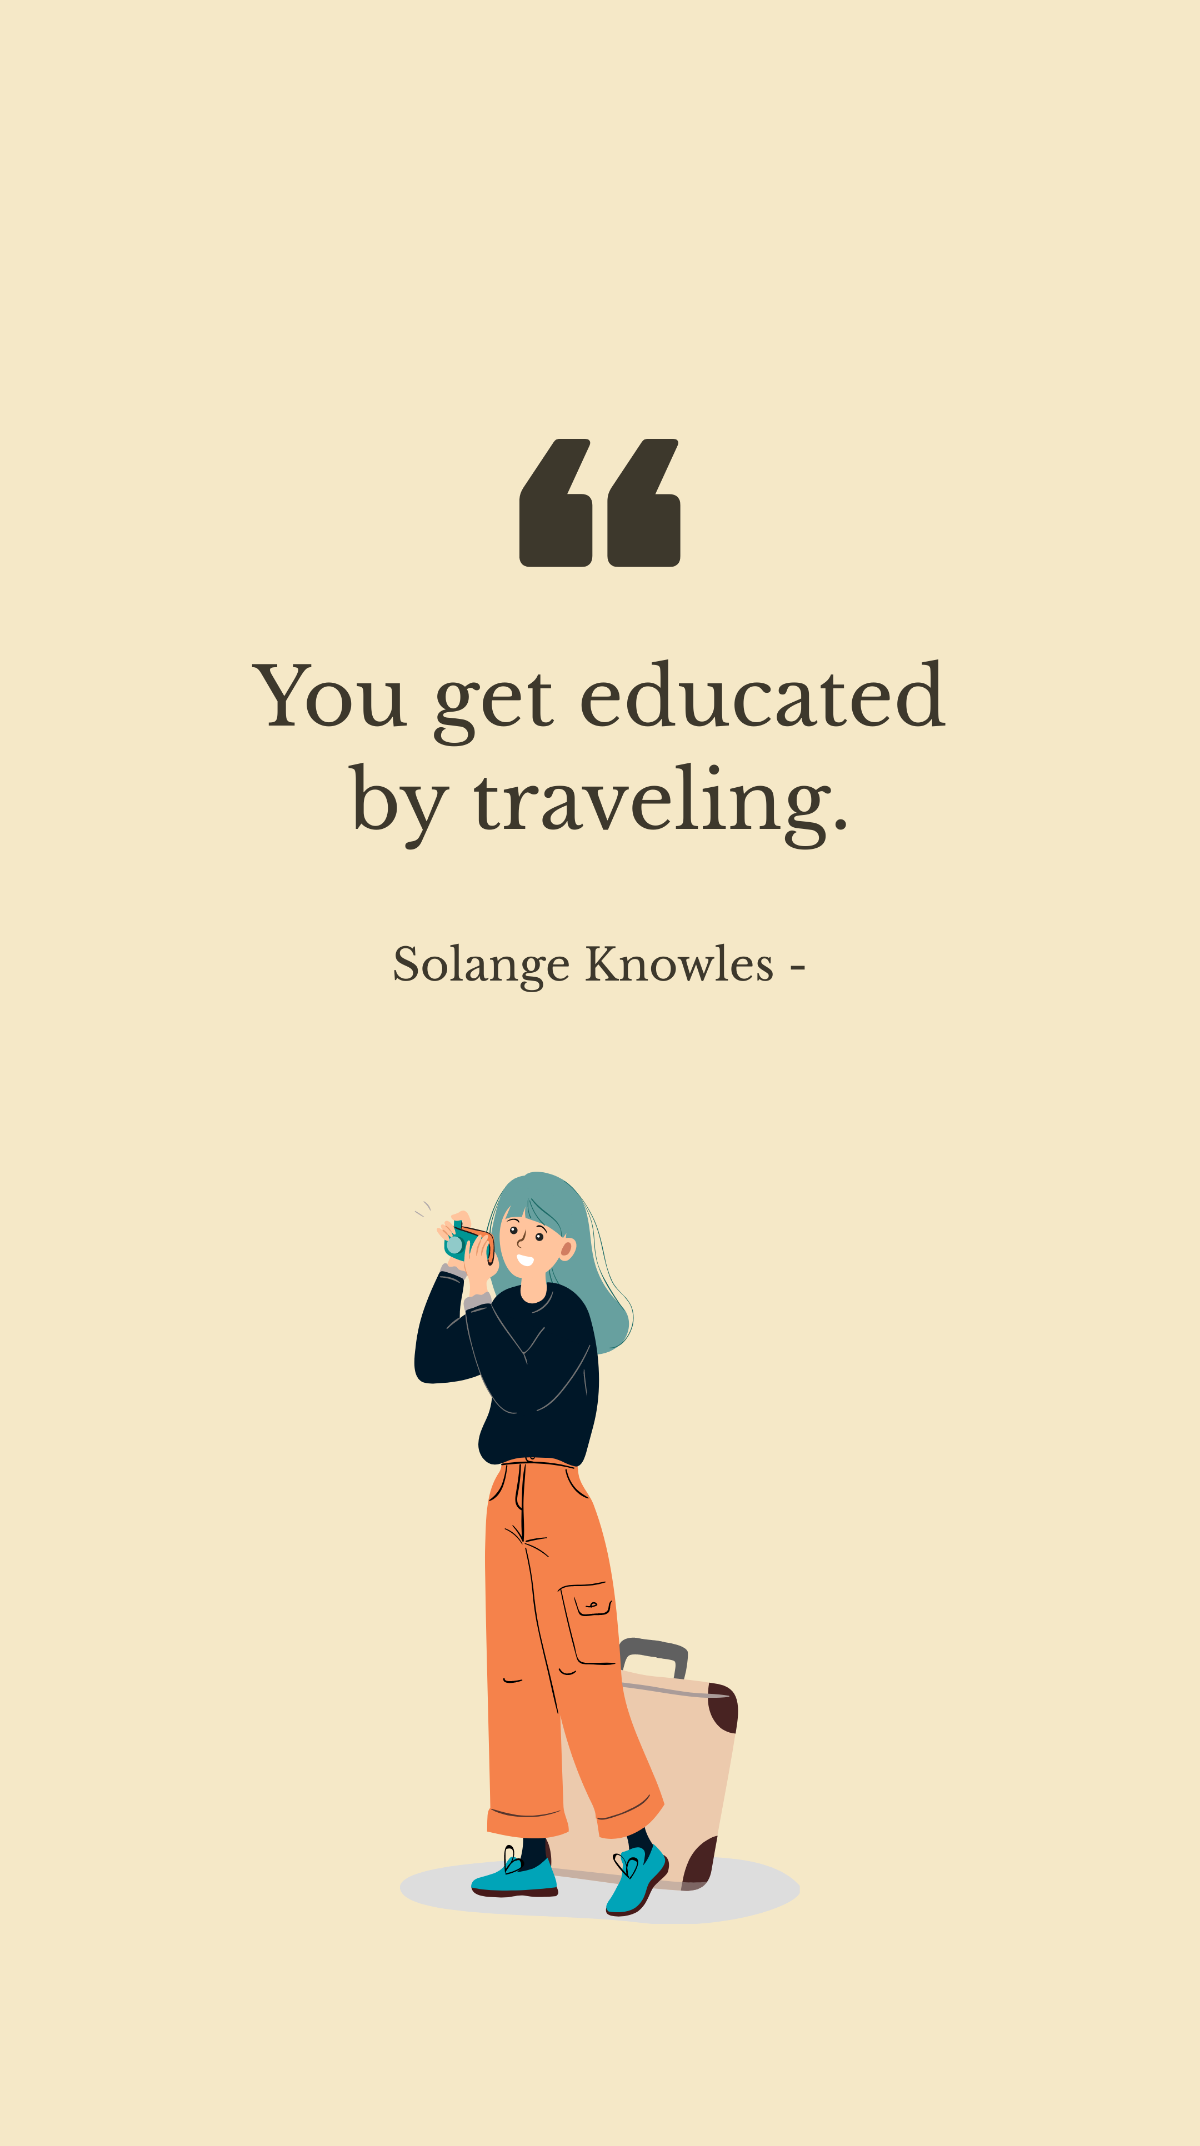 Solange Knowles - You get educated by traveling. Template